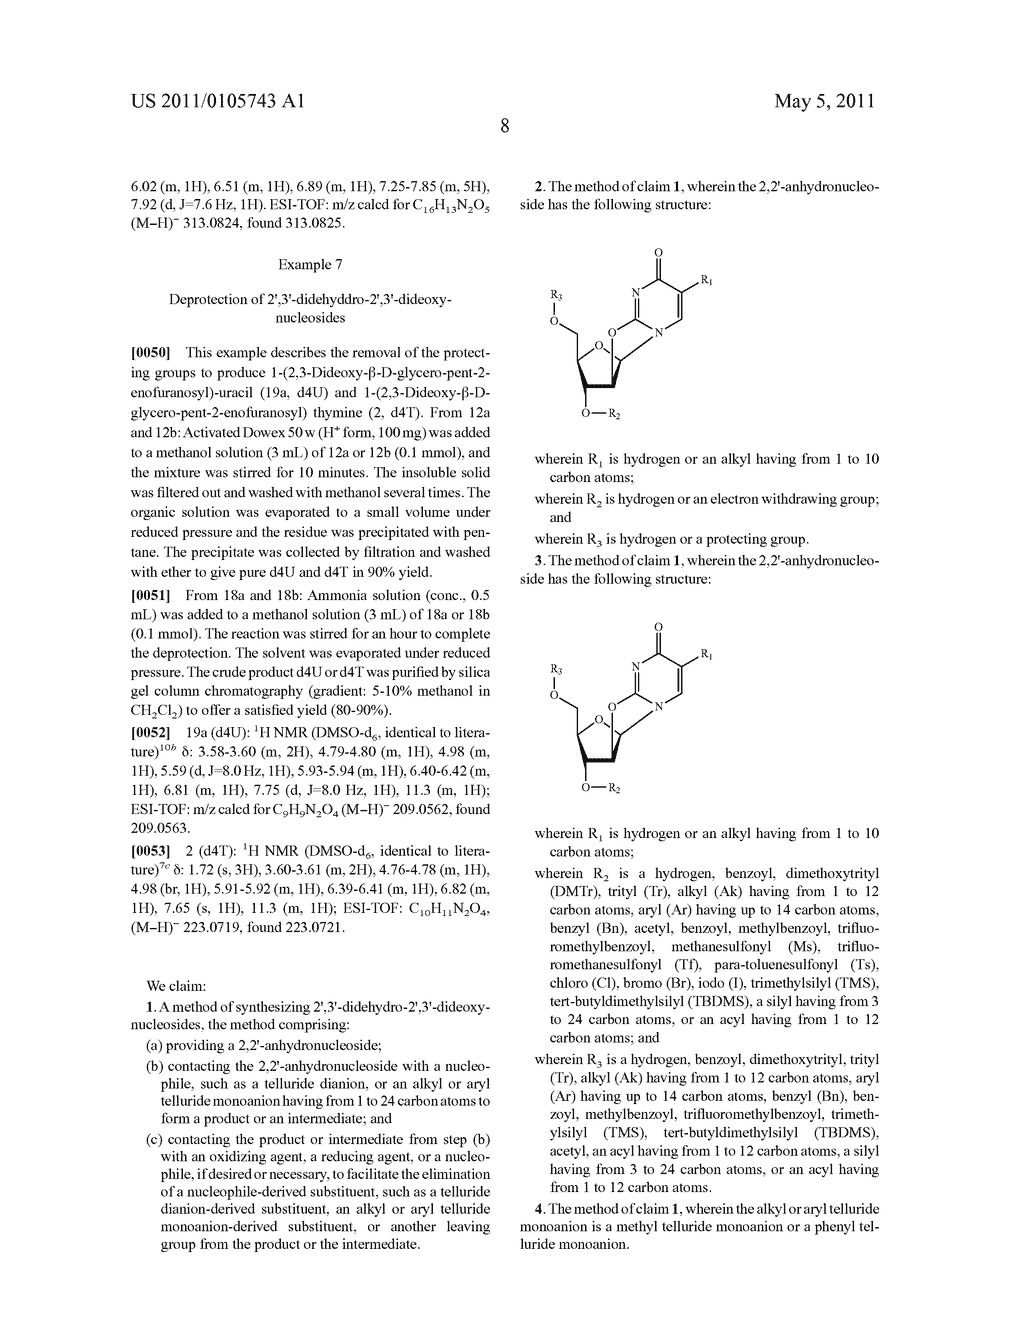 IMPROVED METHOD AND PROCESS FOR SYNTHESIS OF 2',3'-DIDEHYDRO-2',3'-DIDEOXYNUCLEOSIDES - diagram, schematic, and image 09